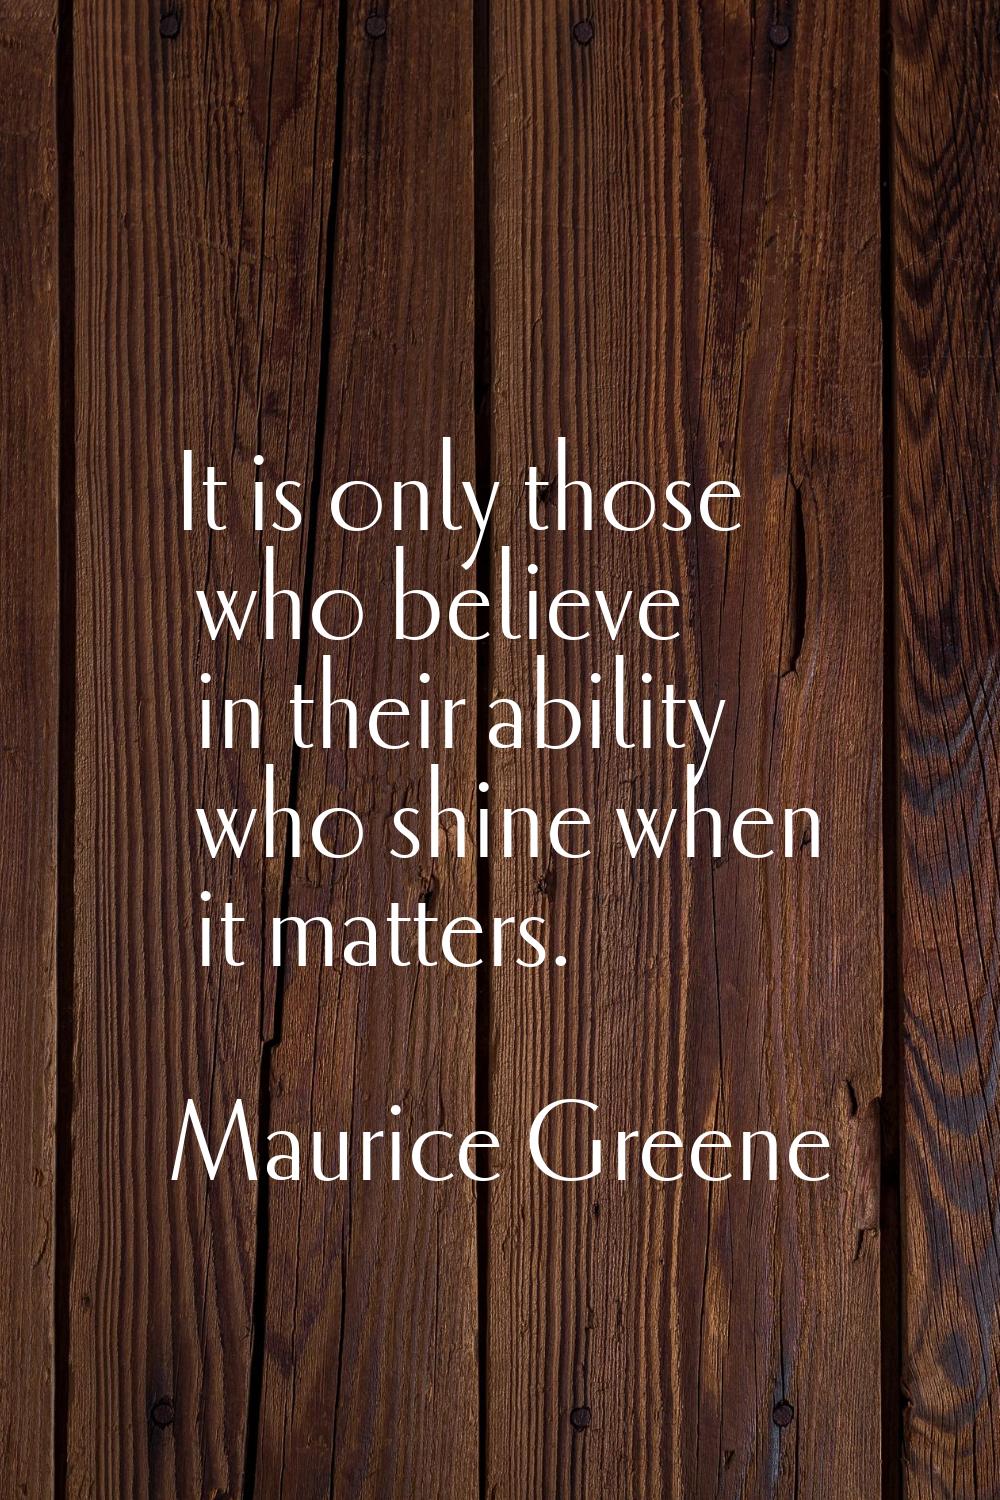 It is only those who believe in their ability who shine when it matters.